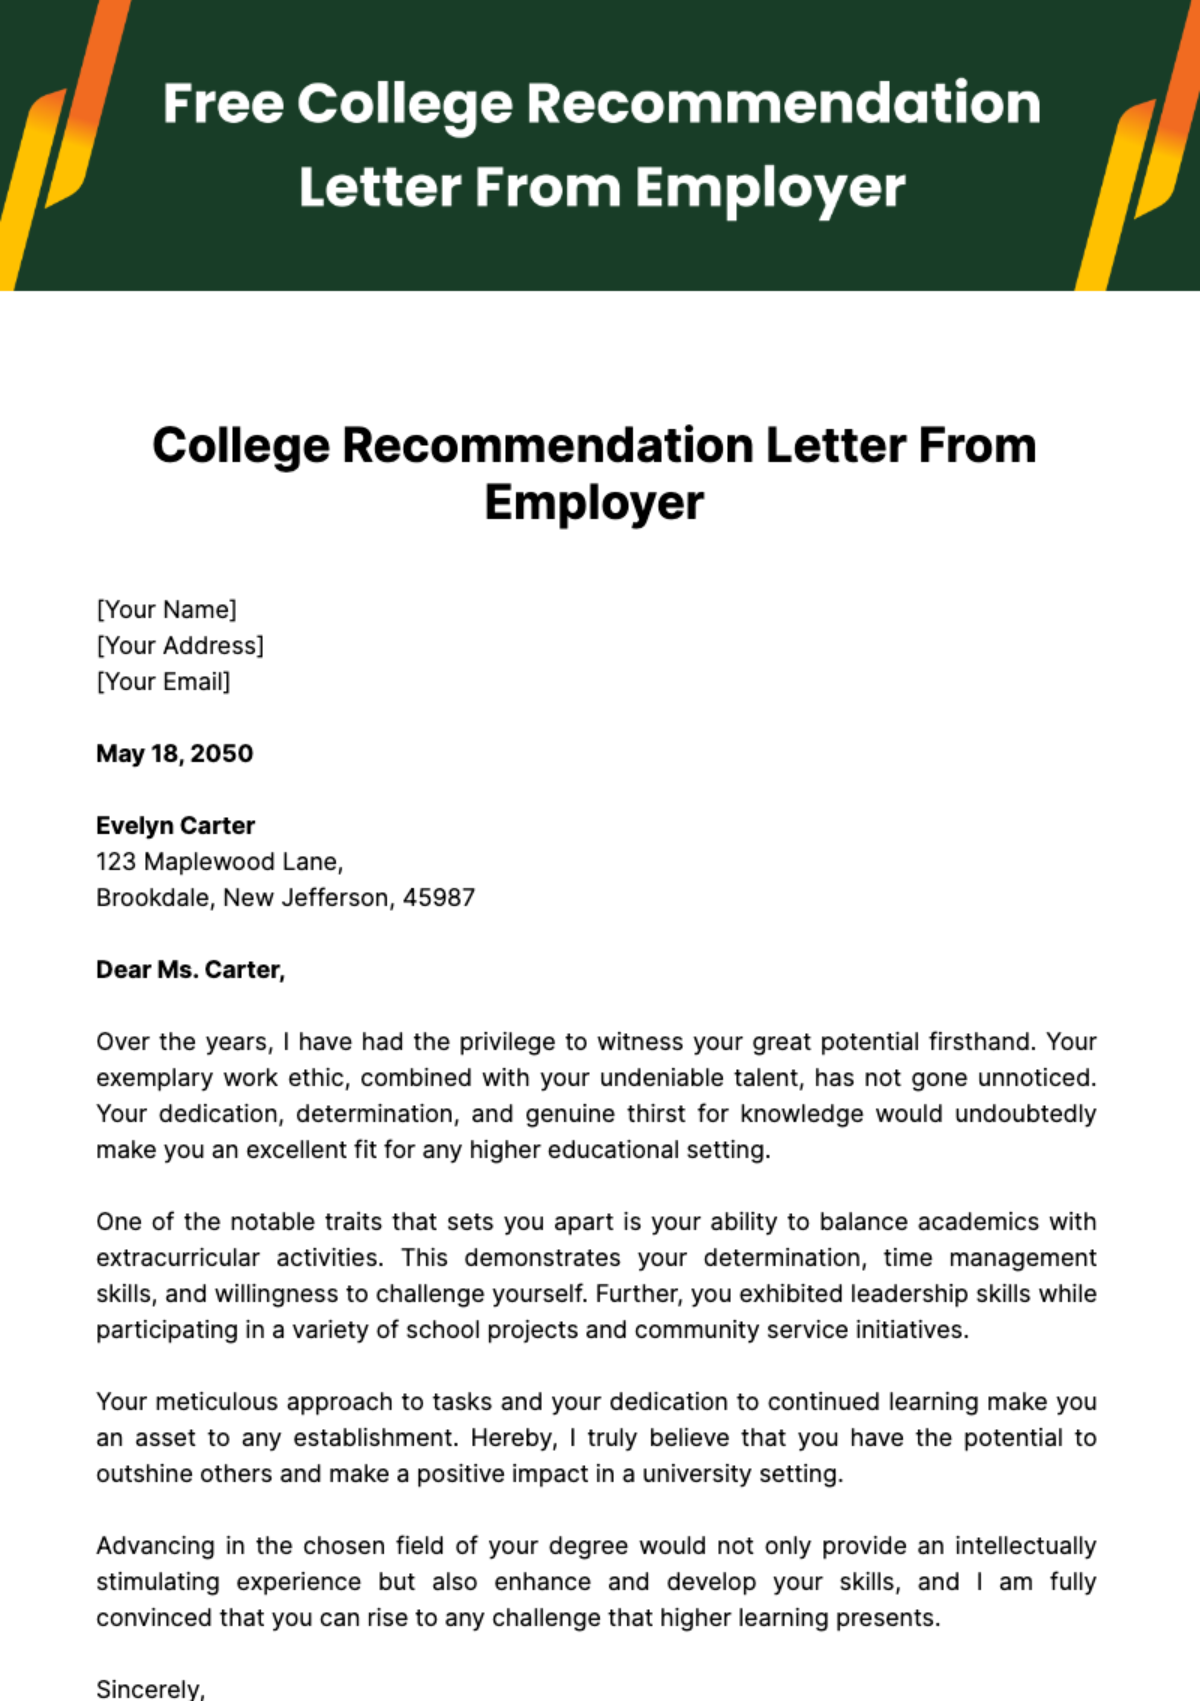 Free College Recommendation Letter from Employer Template